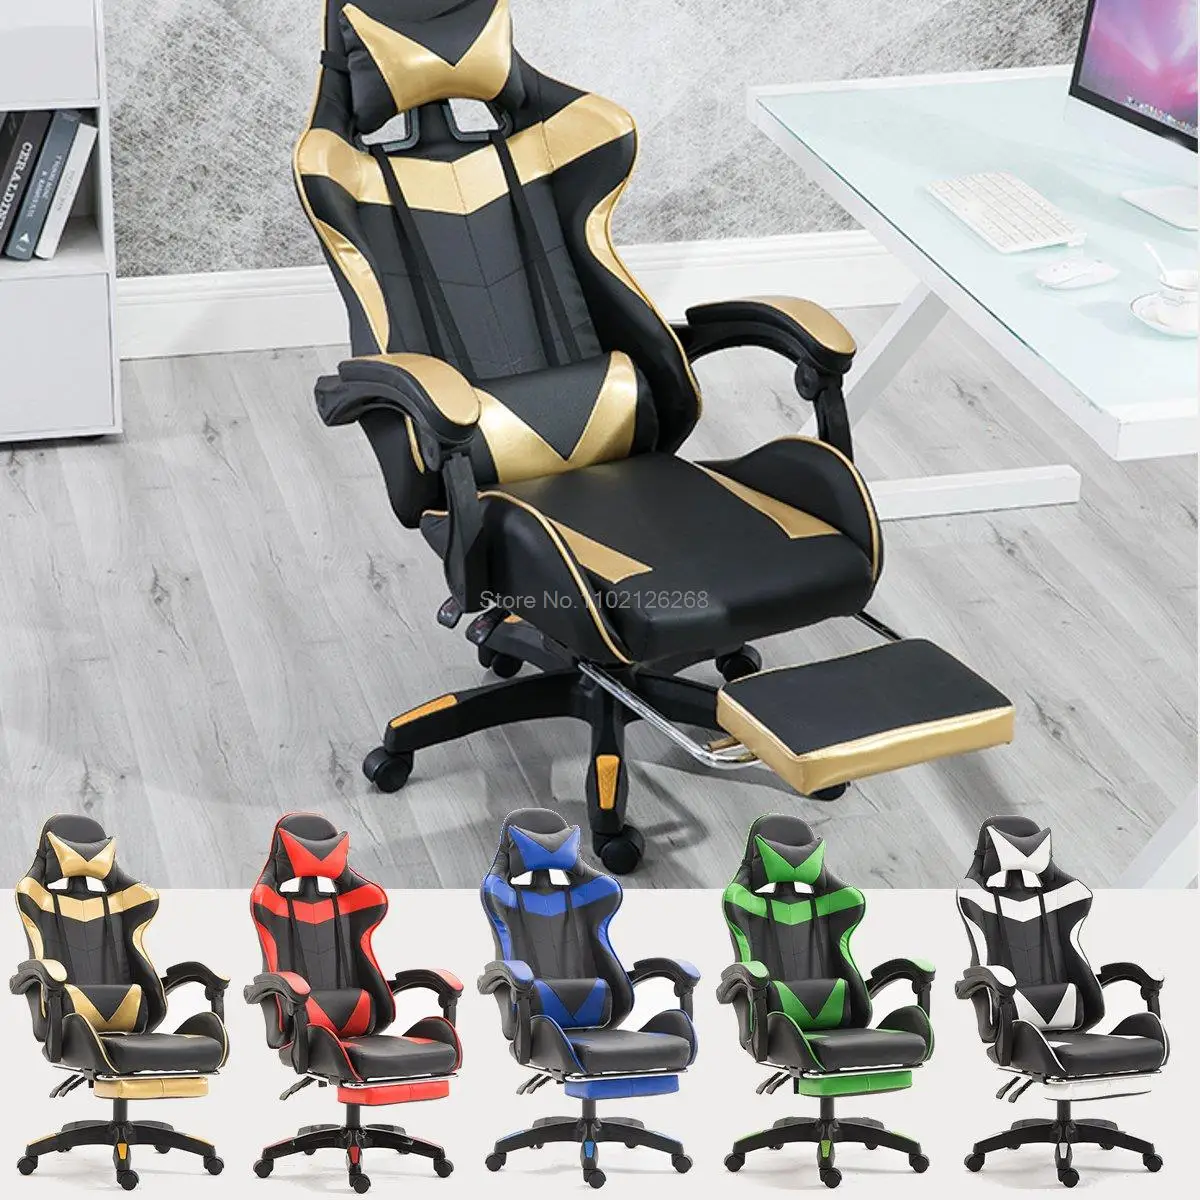 PU Leather Racing Gaming Chair Office High Back Ergonomic Recliner With Footrest Professional Computer Chair Furniture 5 Colors